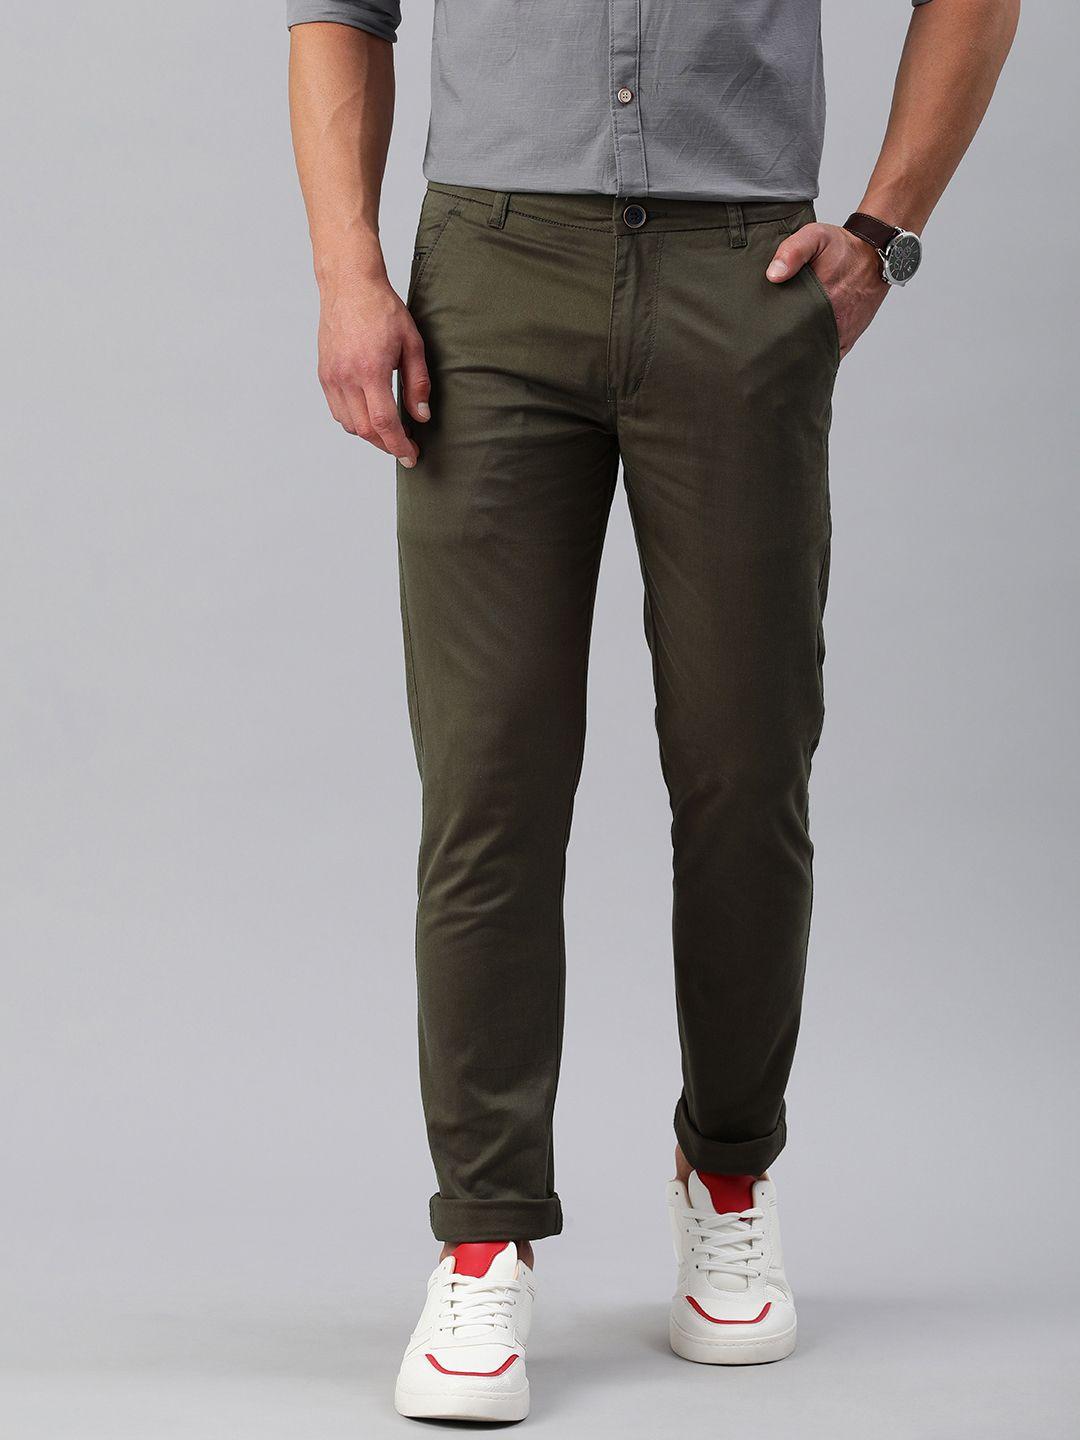 majestic man men relaxed solid slim fit chinos trousers